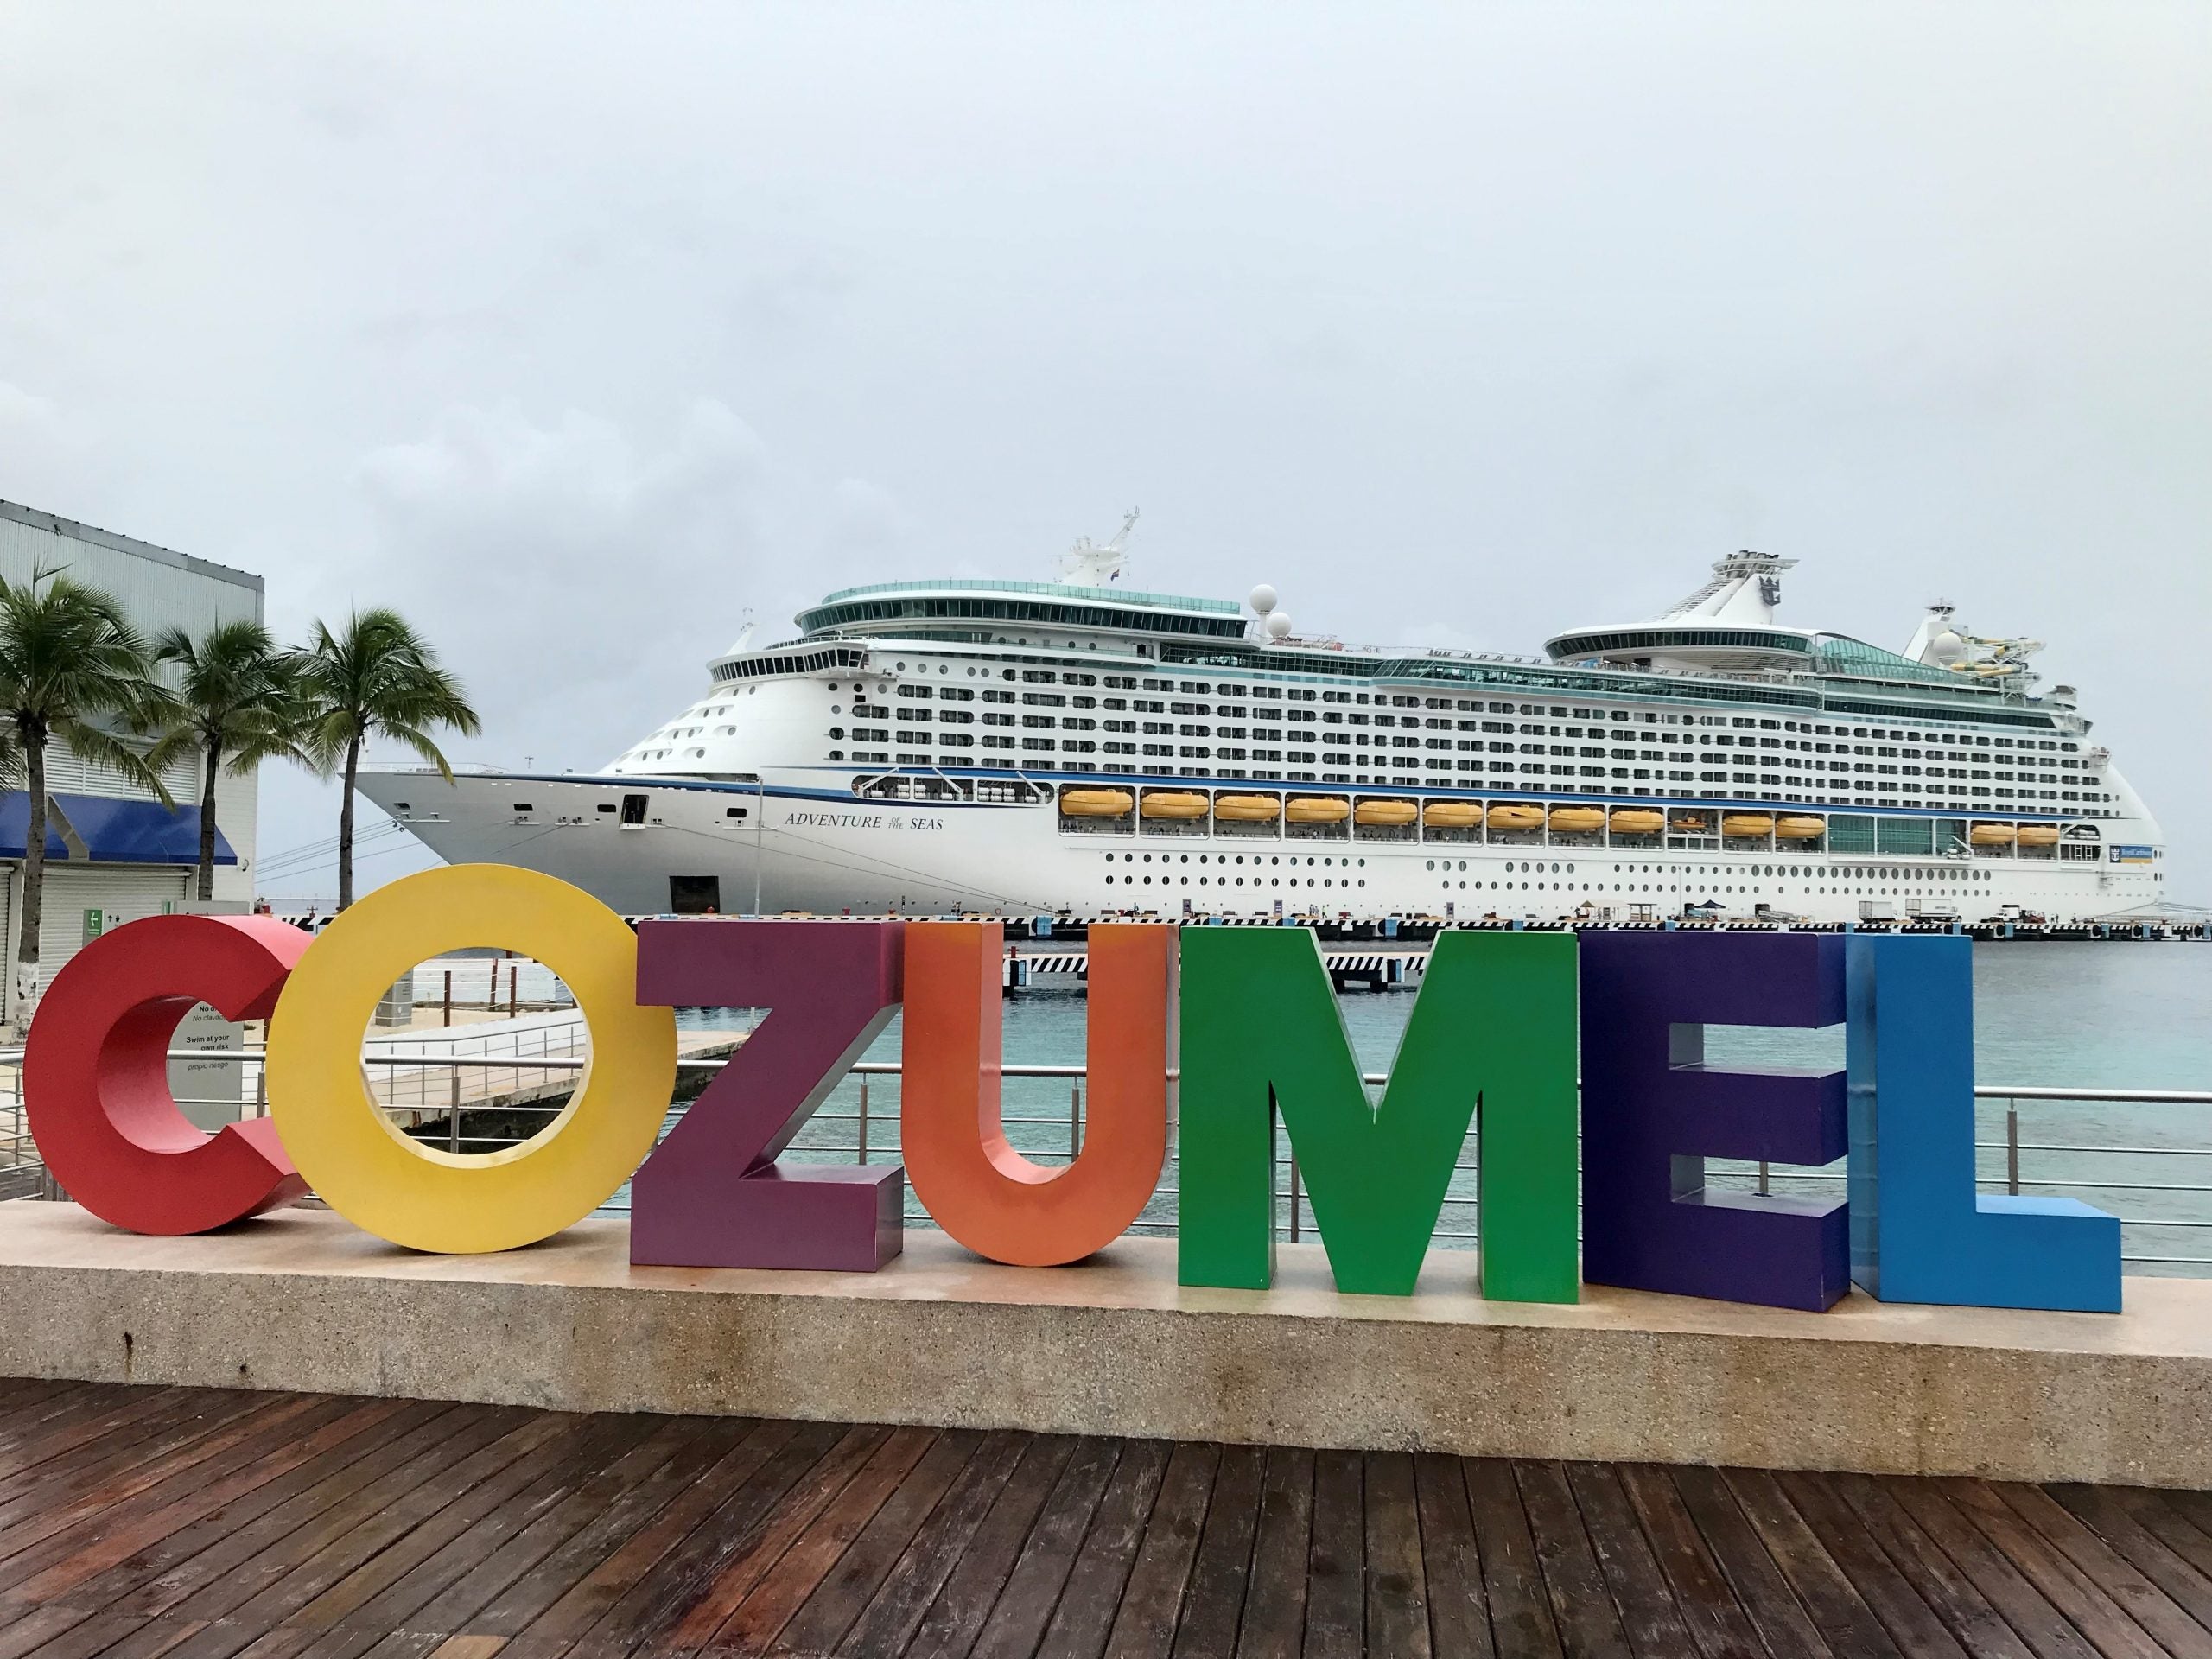 The new rules for cruise ship passengers visiting Cozumel as cruising